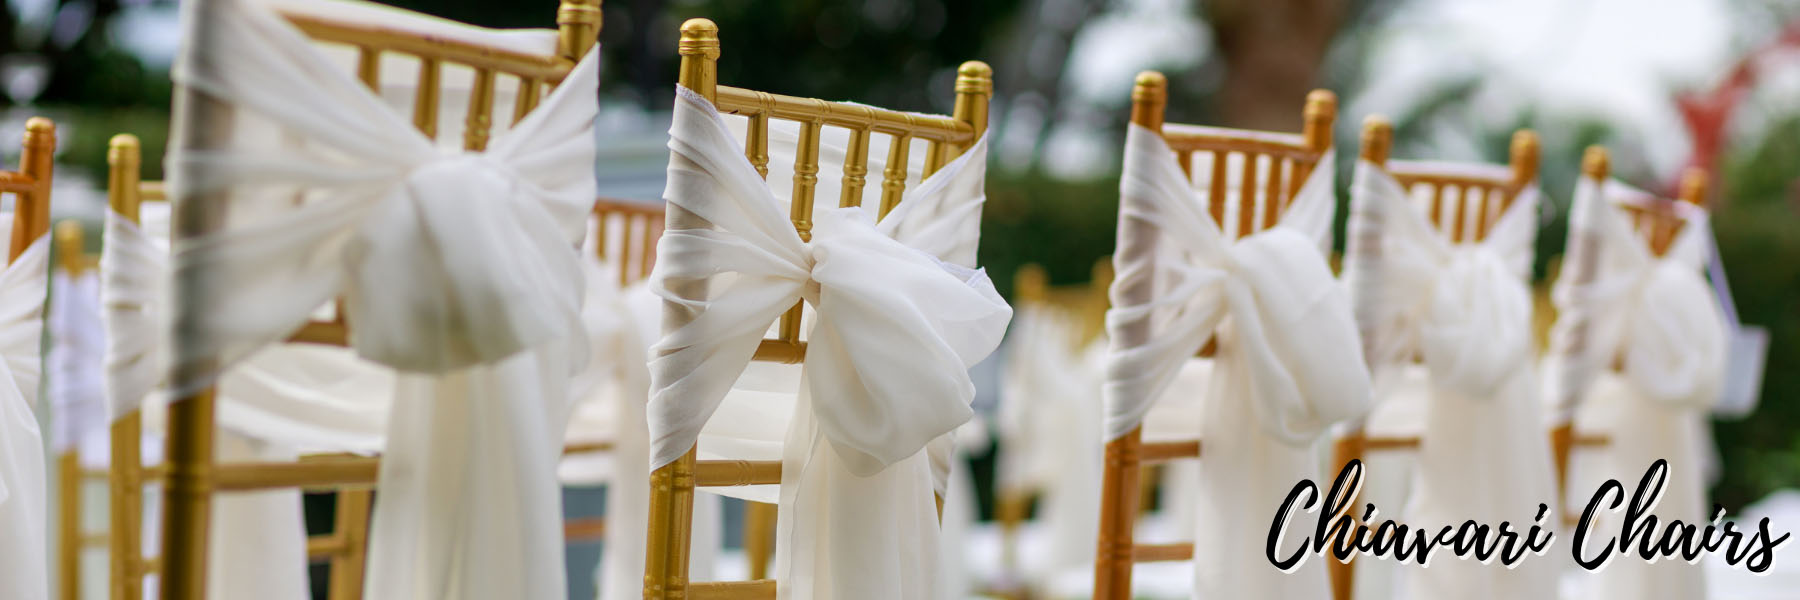 Chiavari Chairs for Events